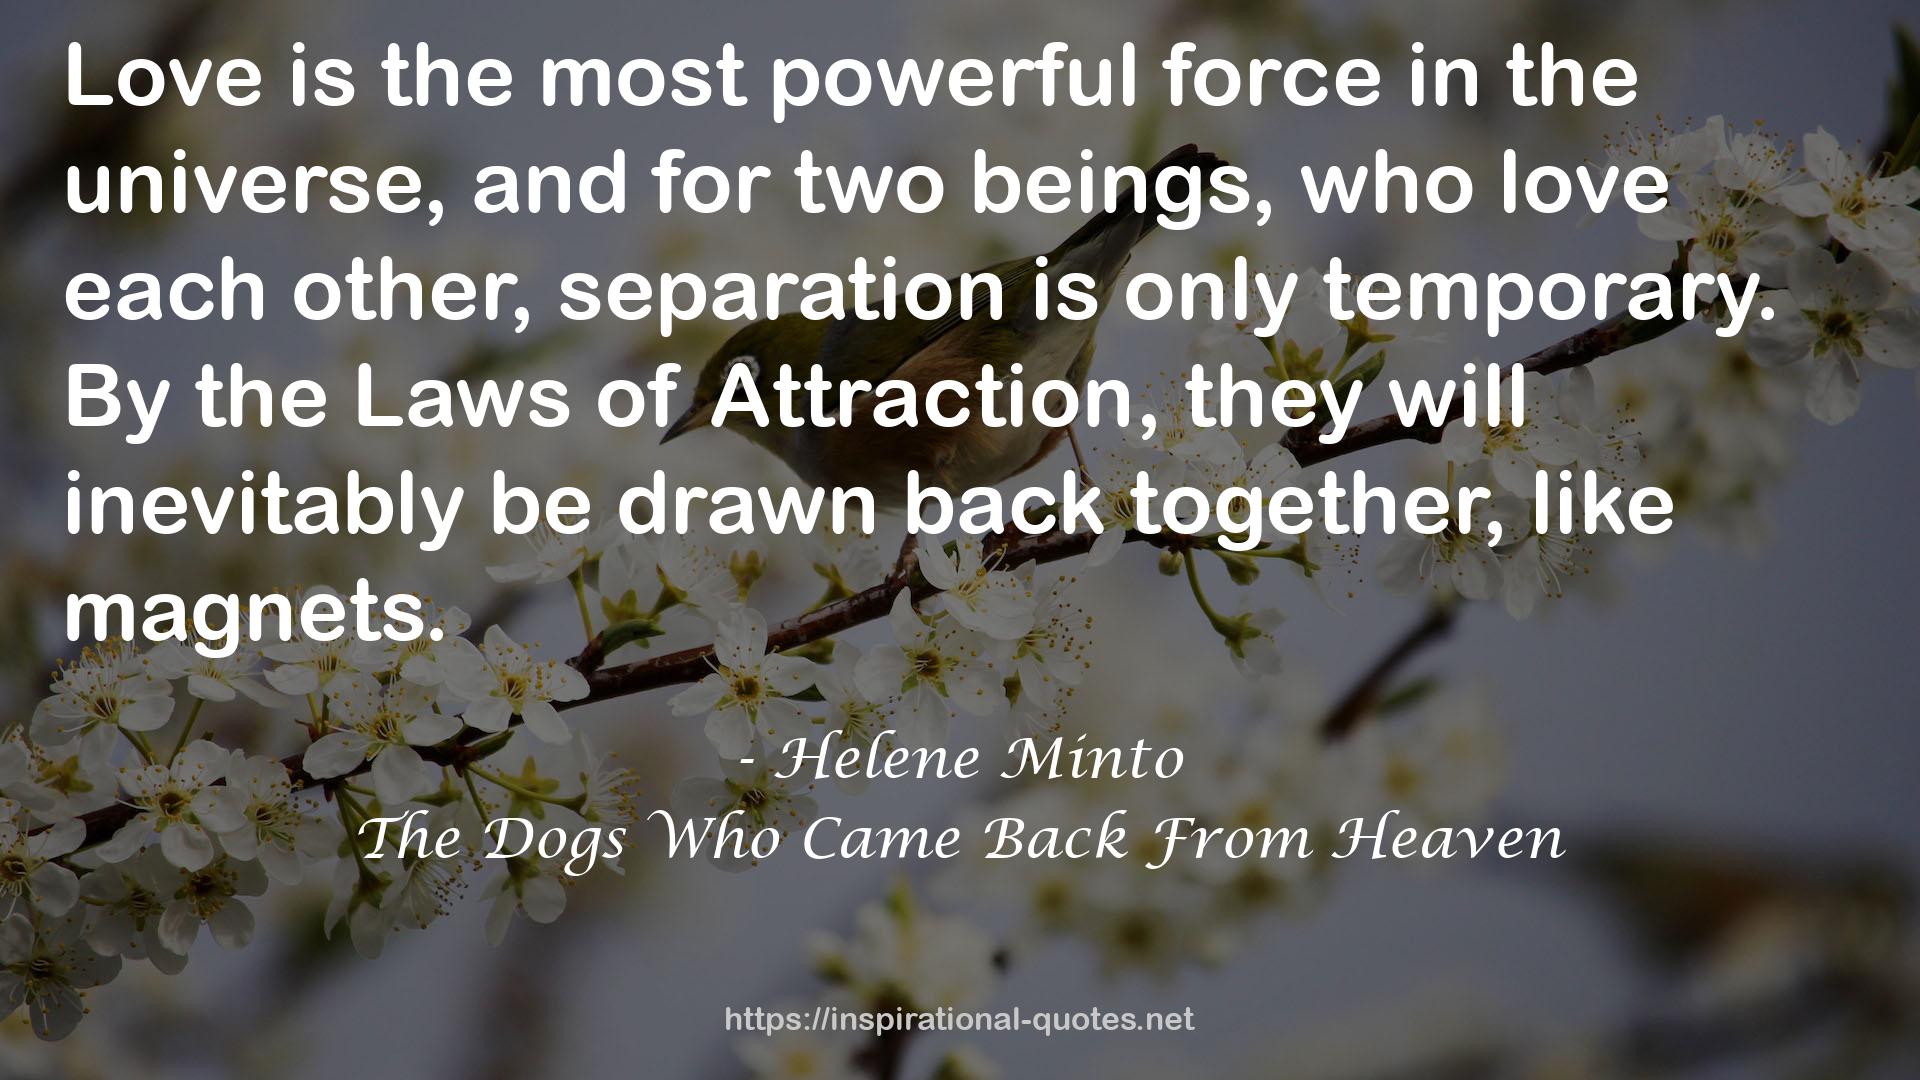 The Dogs Who Came Back From Heaven QUOTES